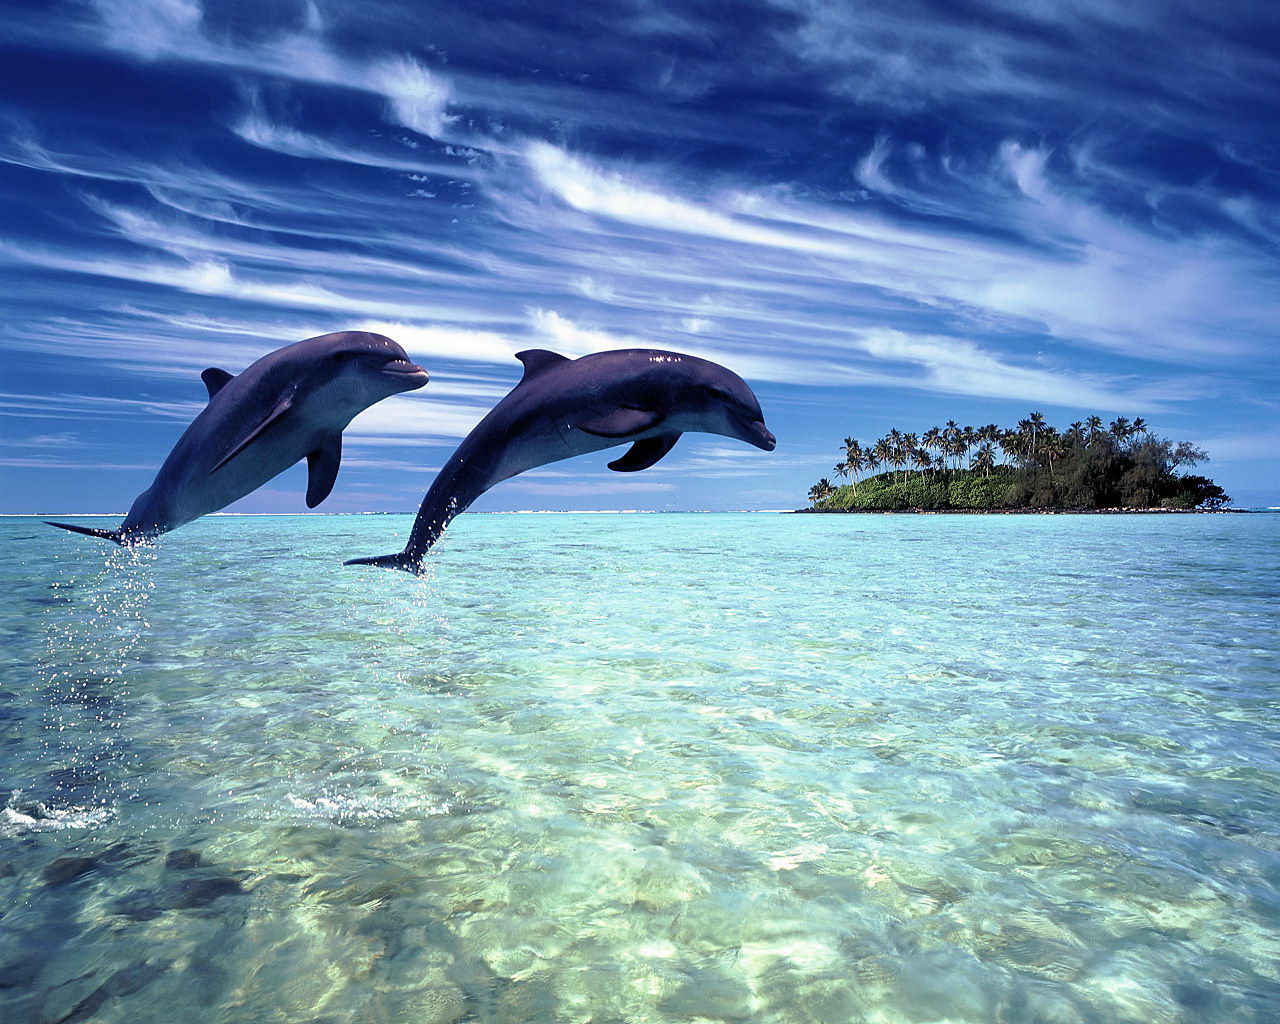 Dolphins Wallpaper 14680 1280x1024 px